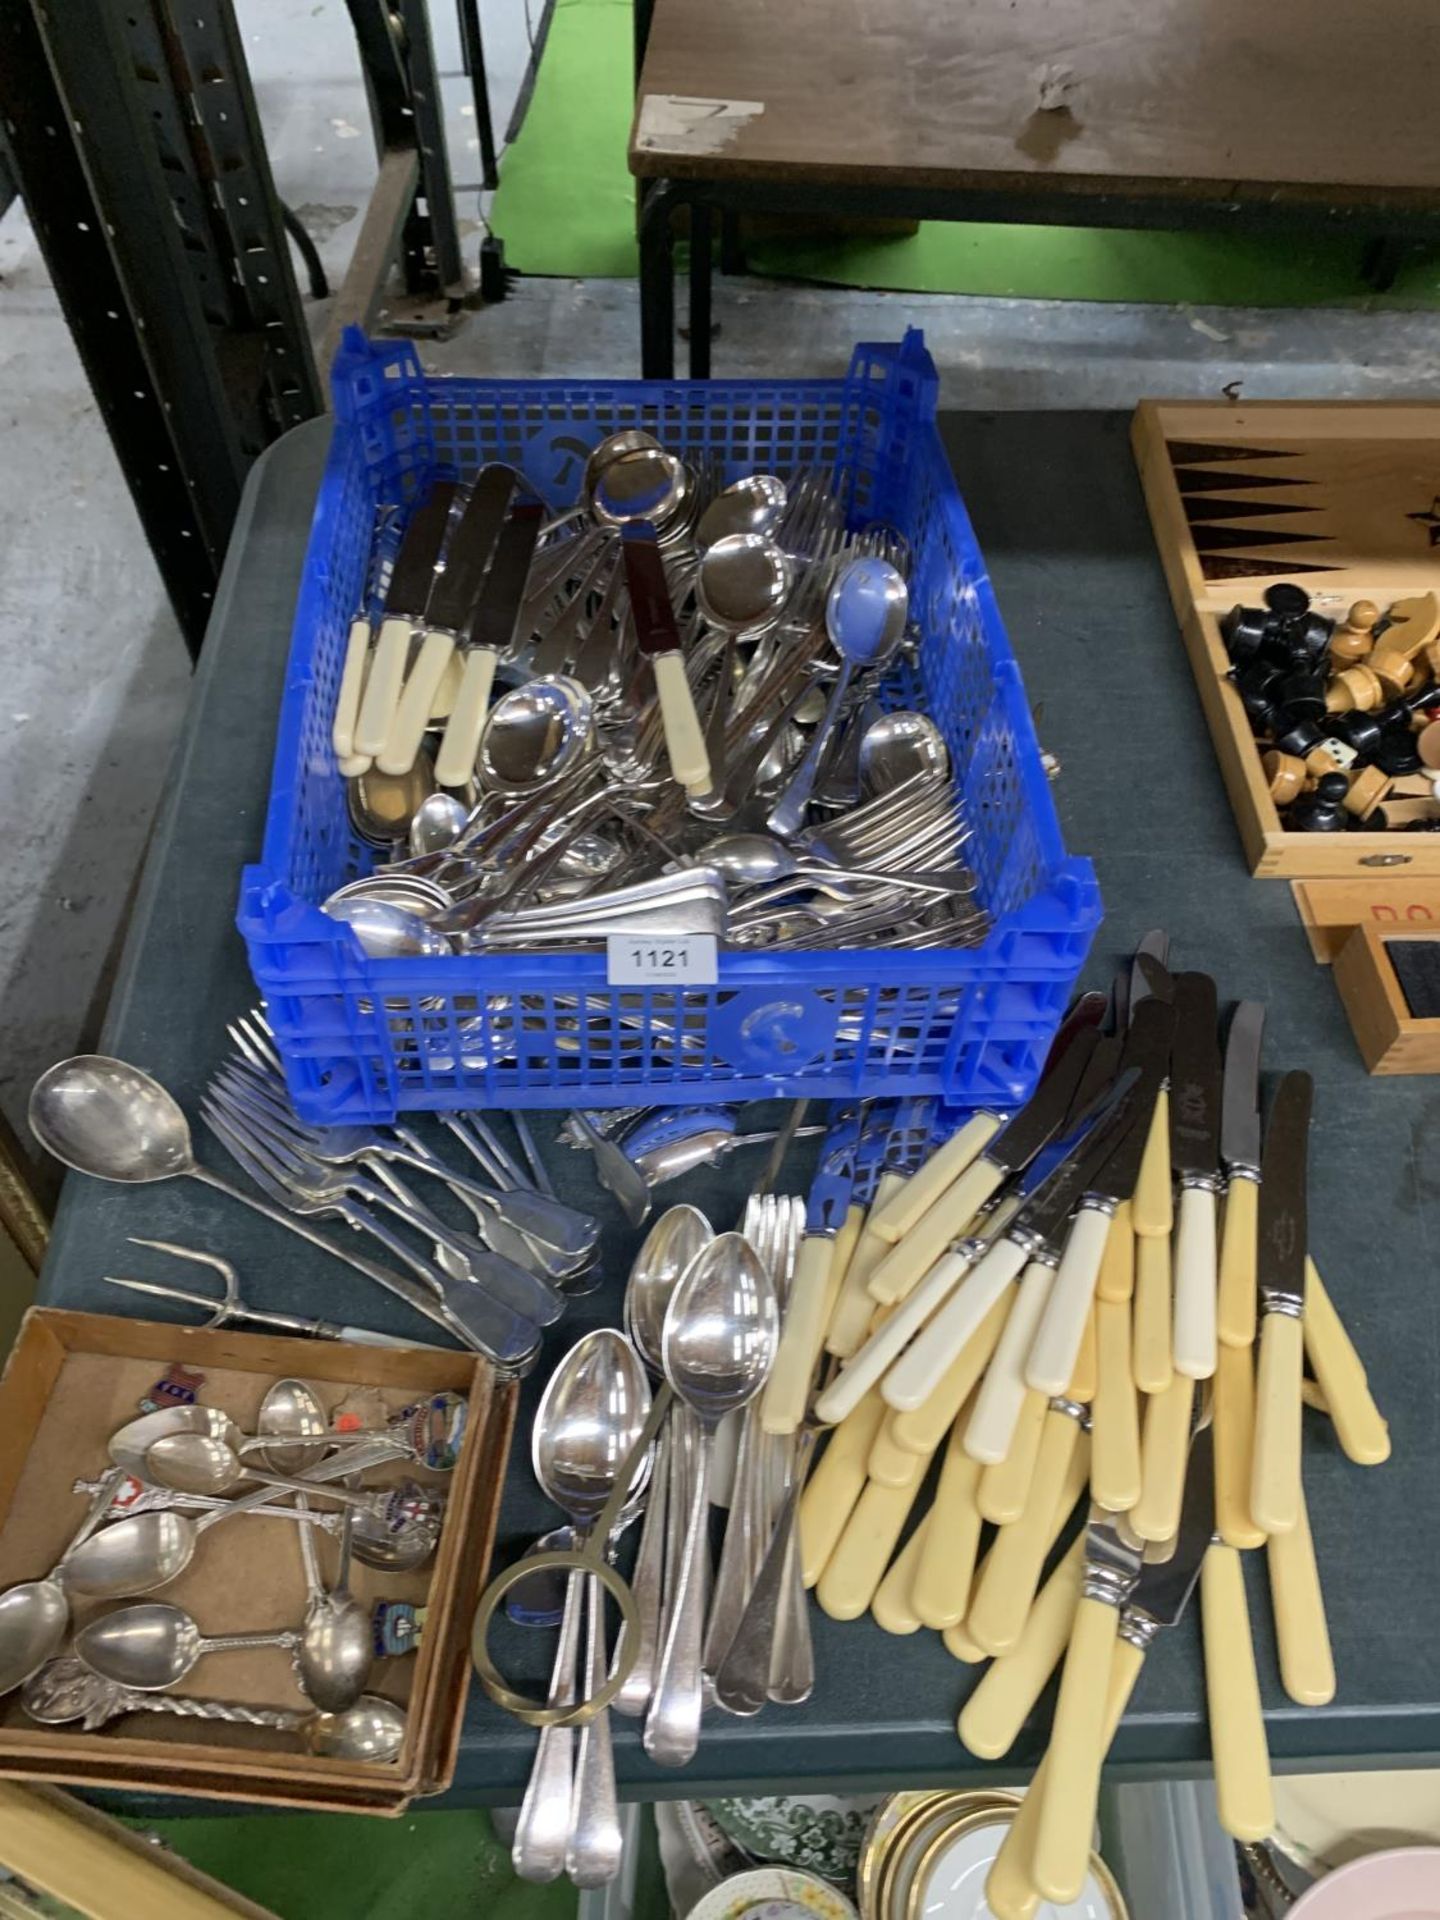 A LARGE QUANTITY OF VINTAGE KNIVES, FORKS AND SPOONS